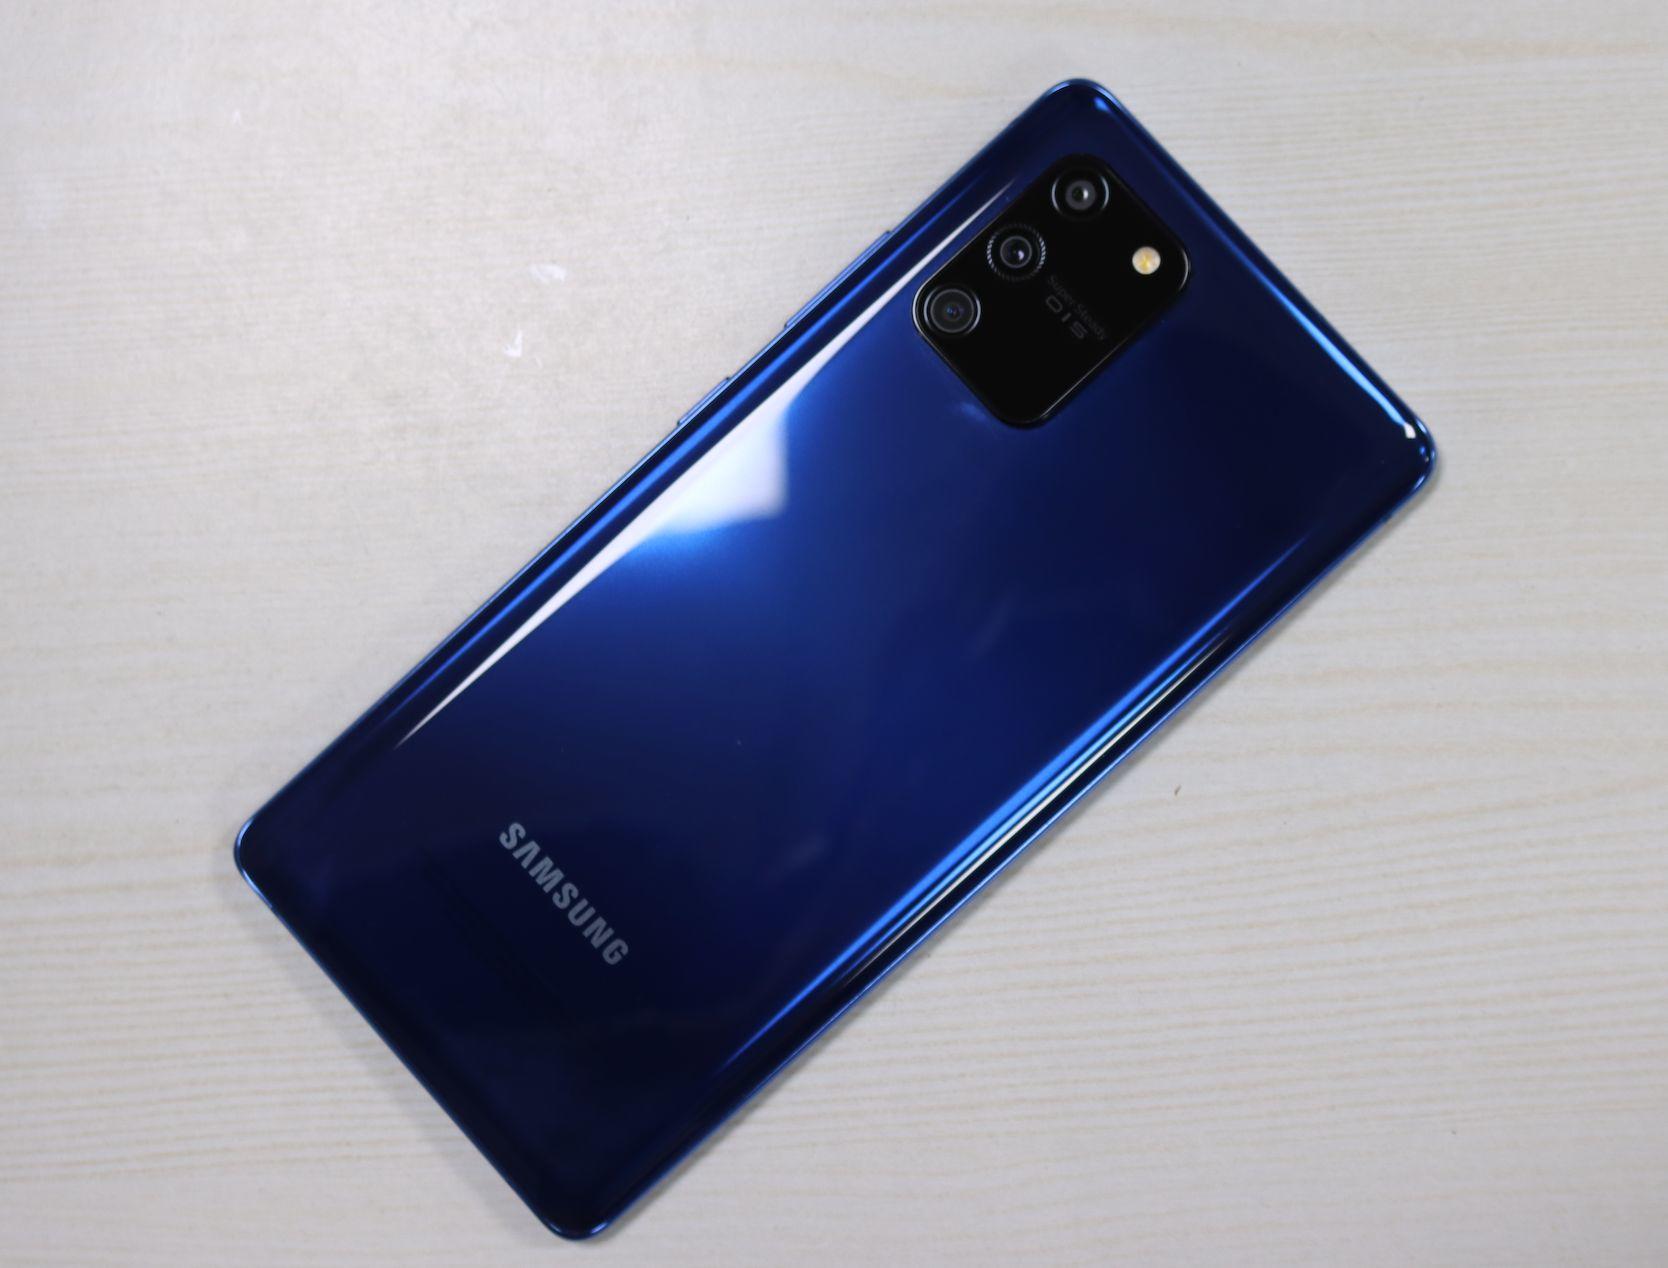 With Android 10-powered OneUI interface, the Samsung Galaxy S 10 offers good software experience